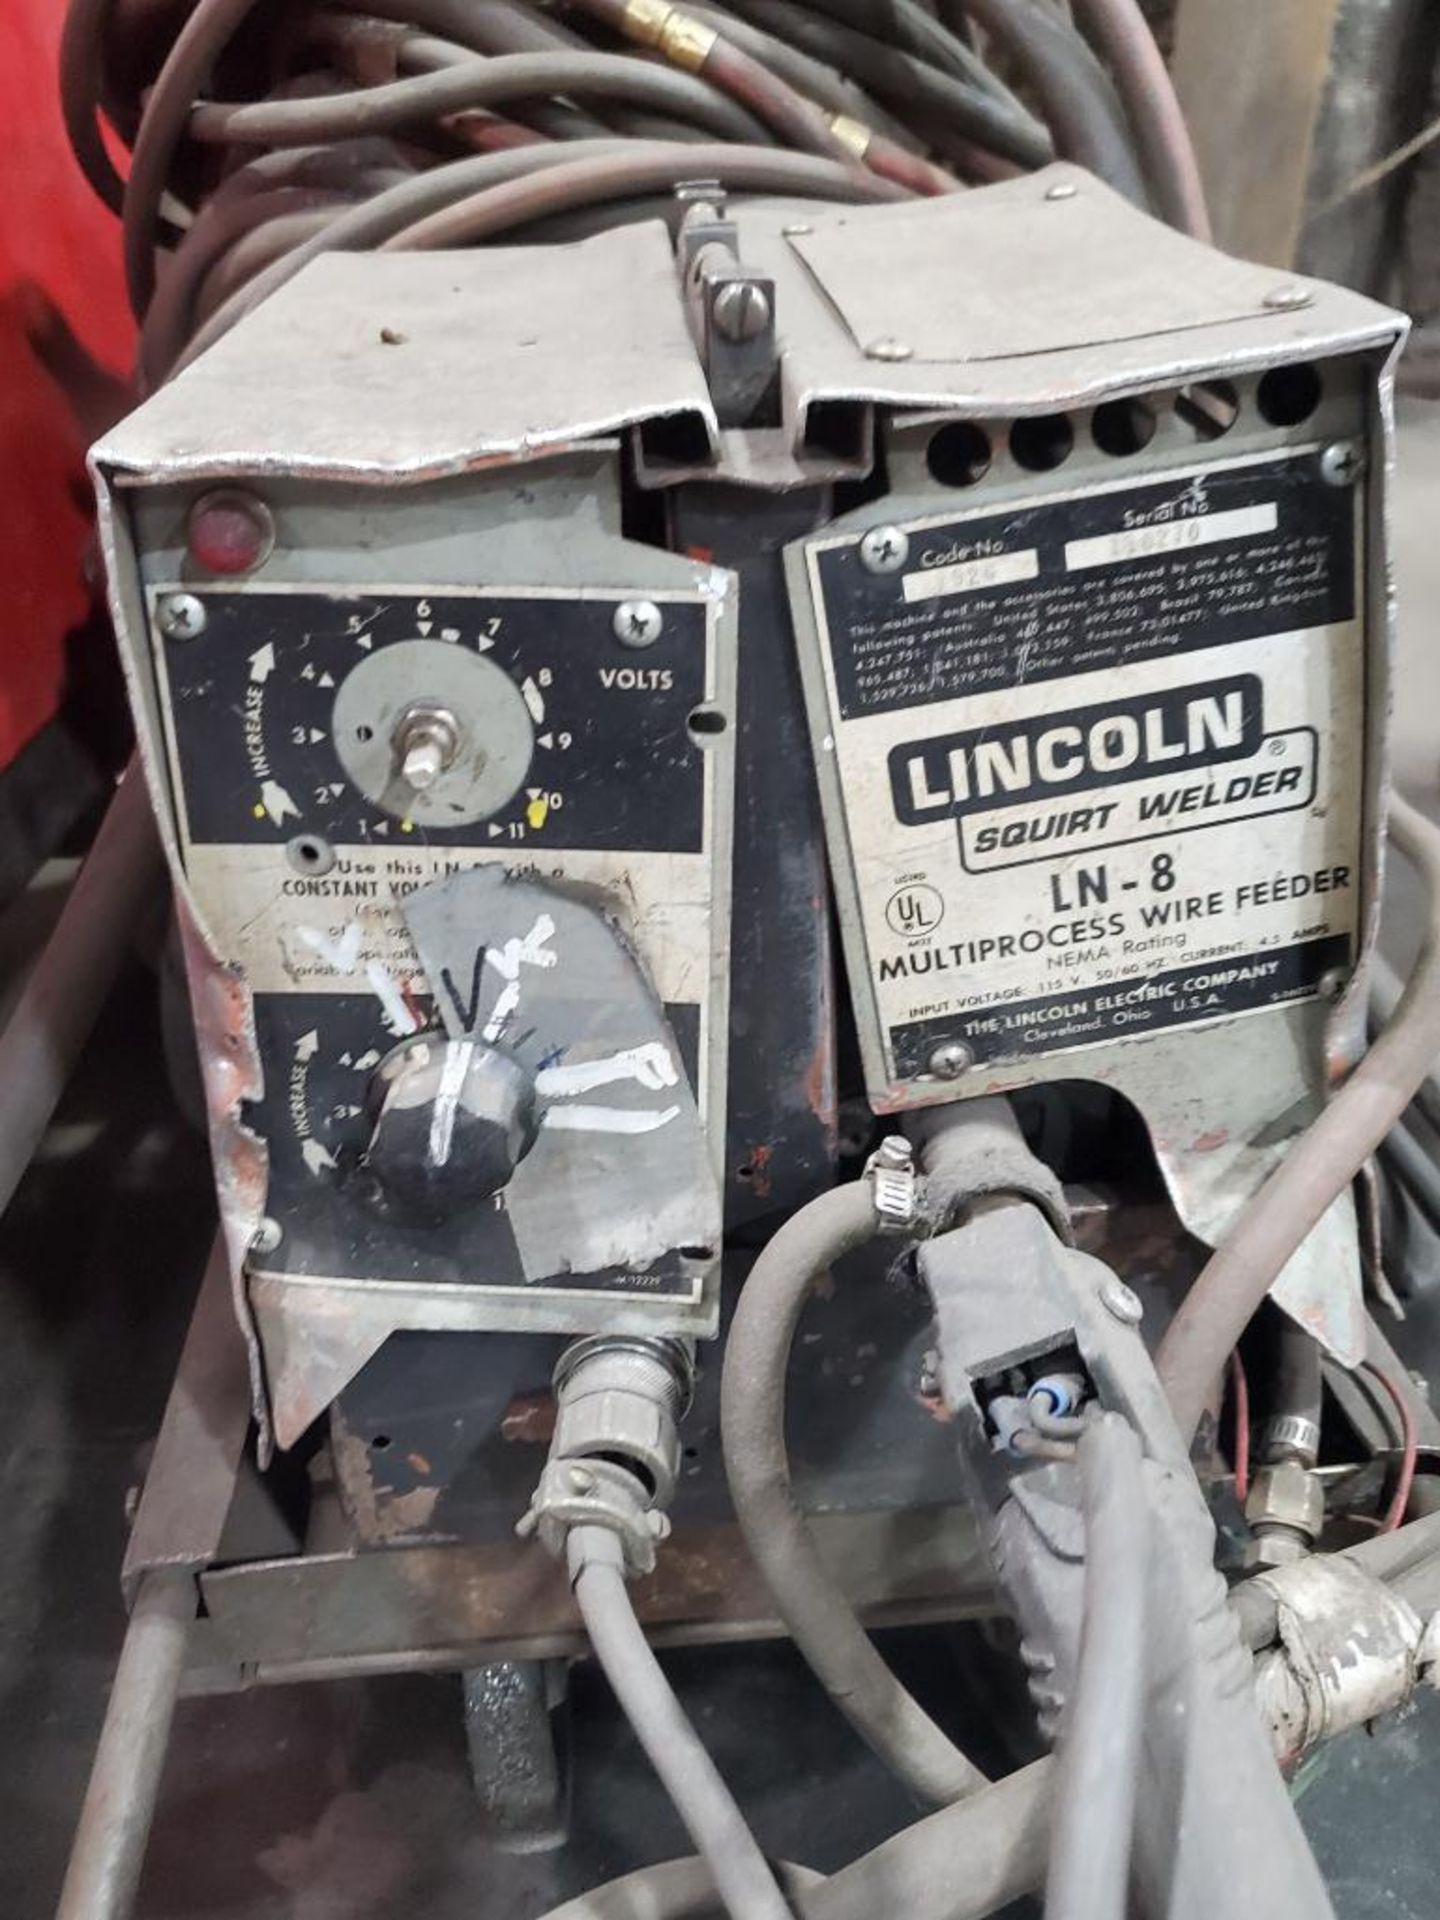 LINCOLN ELECTRIC IDEALARC DC-600 WELDER SN.AC819957 230-460V WITH LN-8 WIRE FEED SN.110270 115V - Image 5 of 6